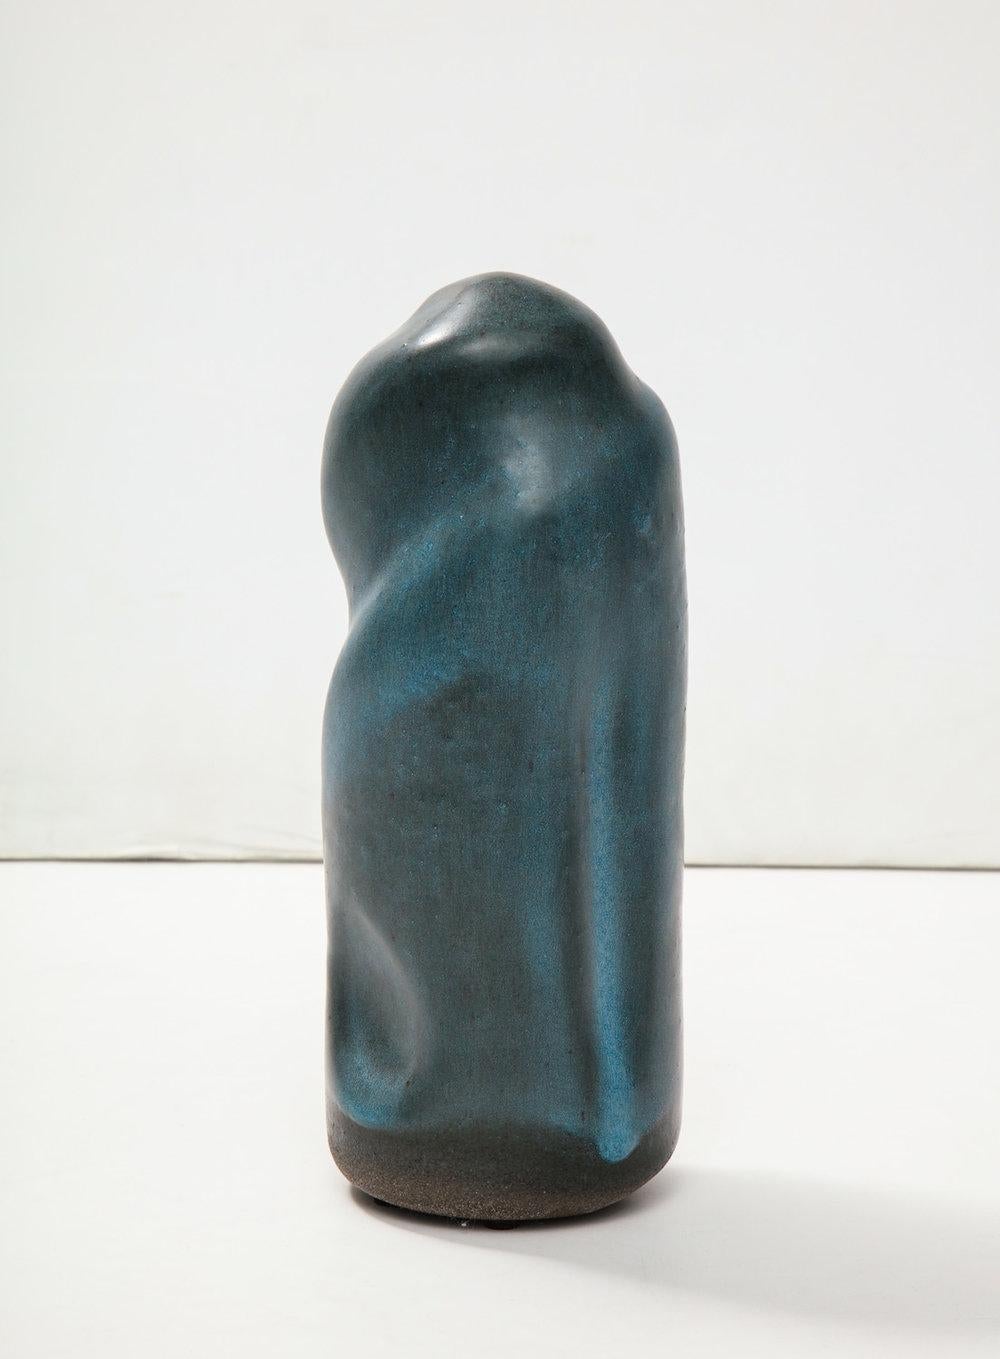 Cylindrical totem-form, wheel thrown, with indented twist details. Teal-blue glaze. Hand-built and artist-signed on underside.